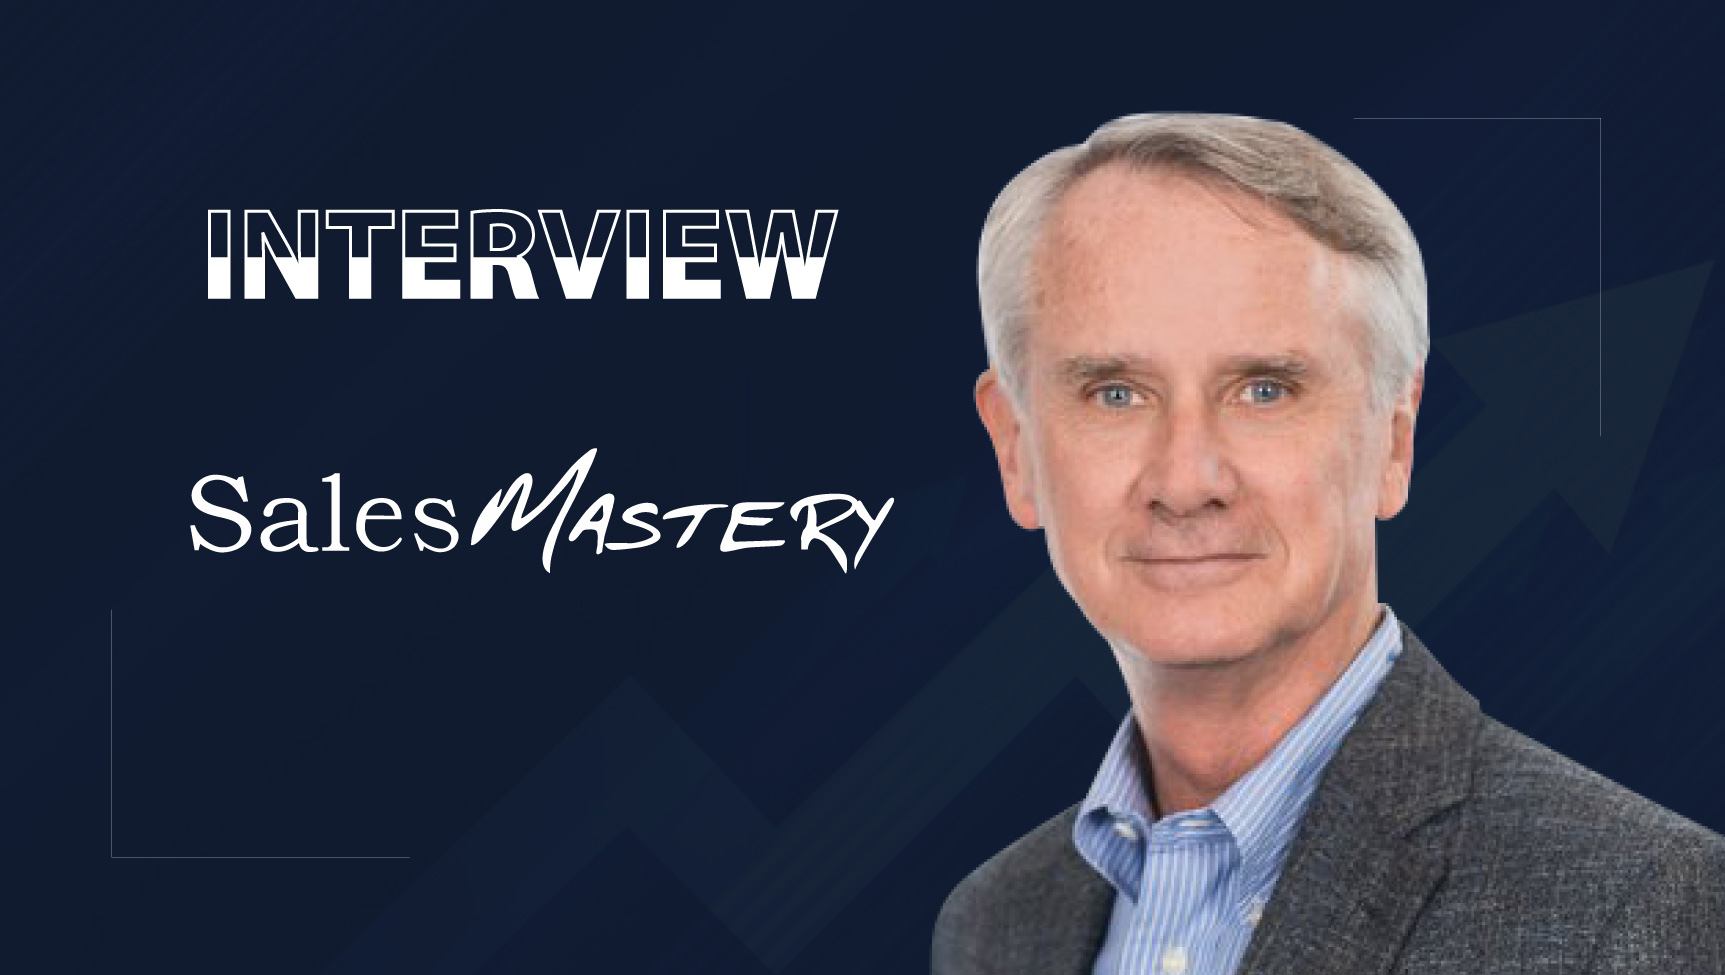 SalesTech Star Interview With Jim Dickie, Research Fellow At Sales Mastery